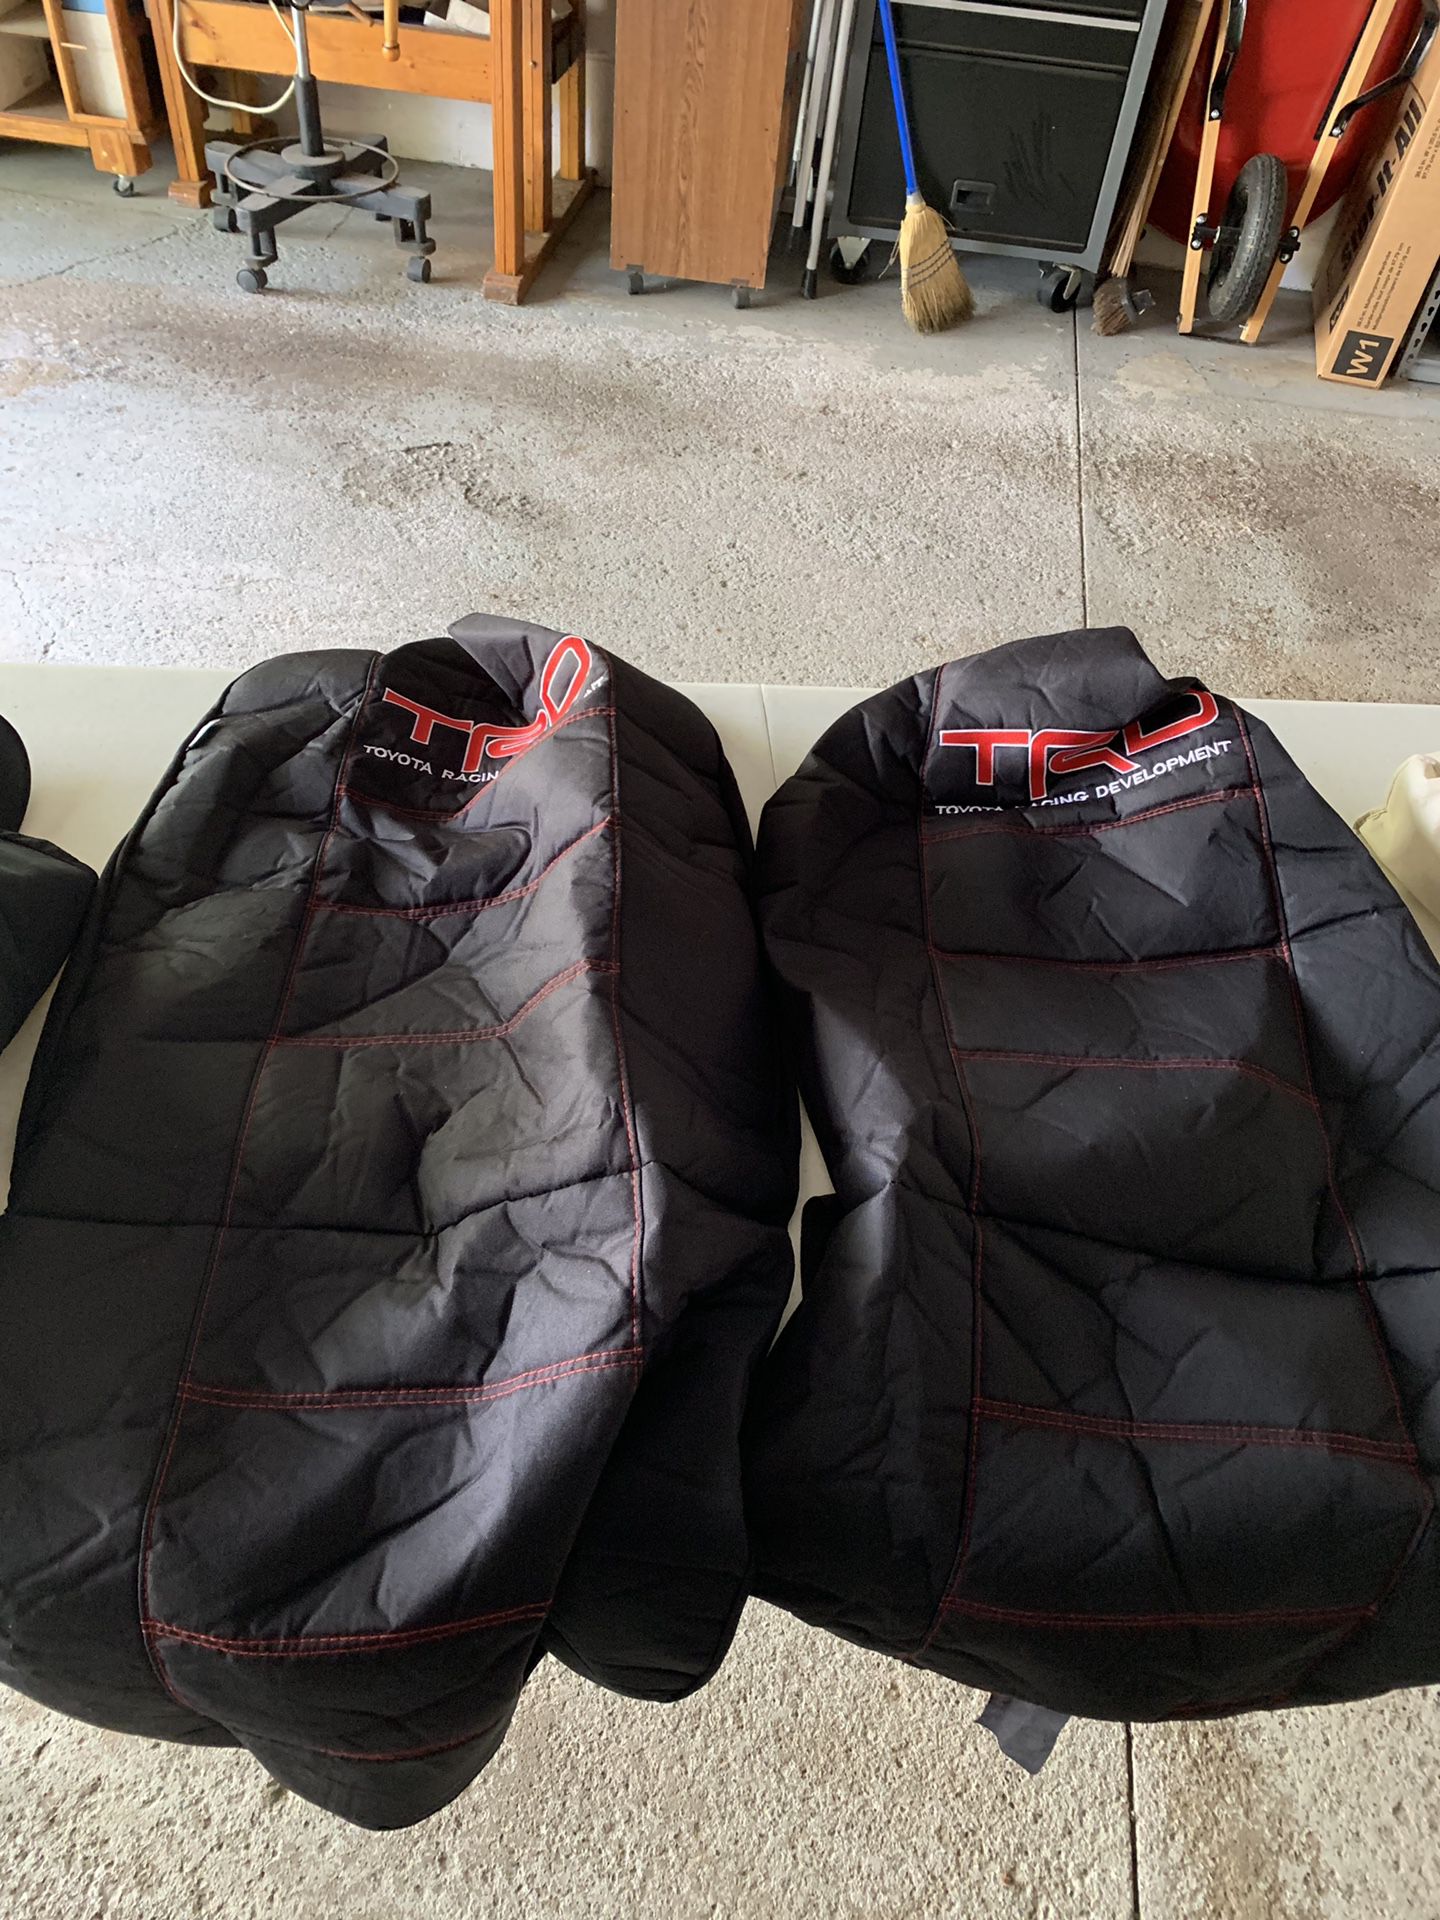 Toyota car seat covers